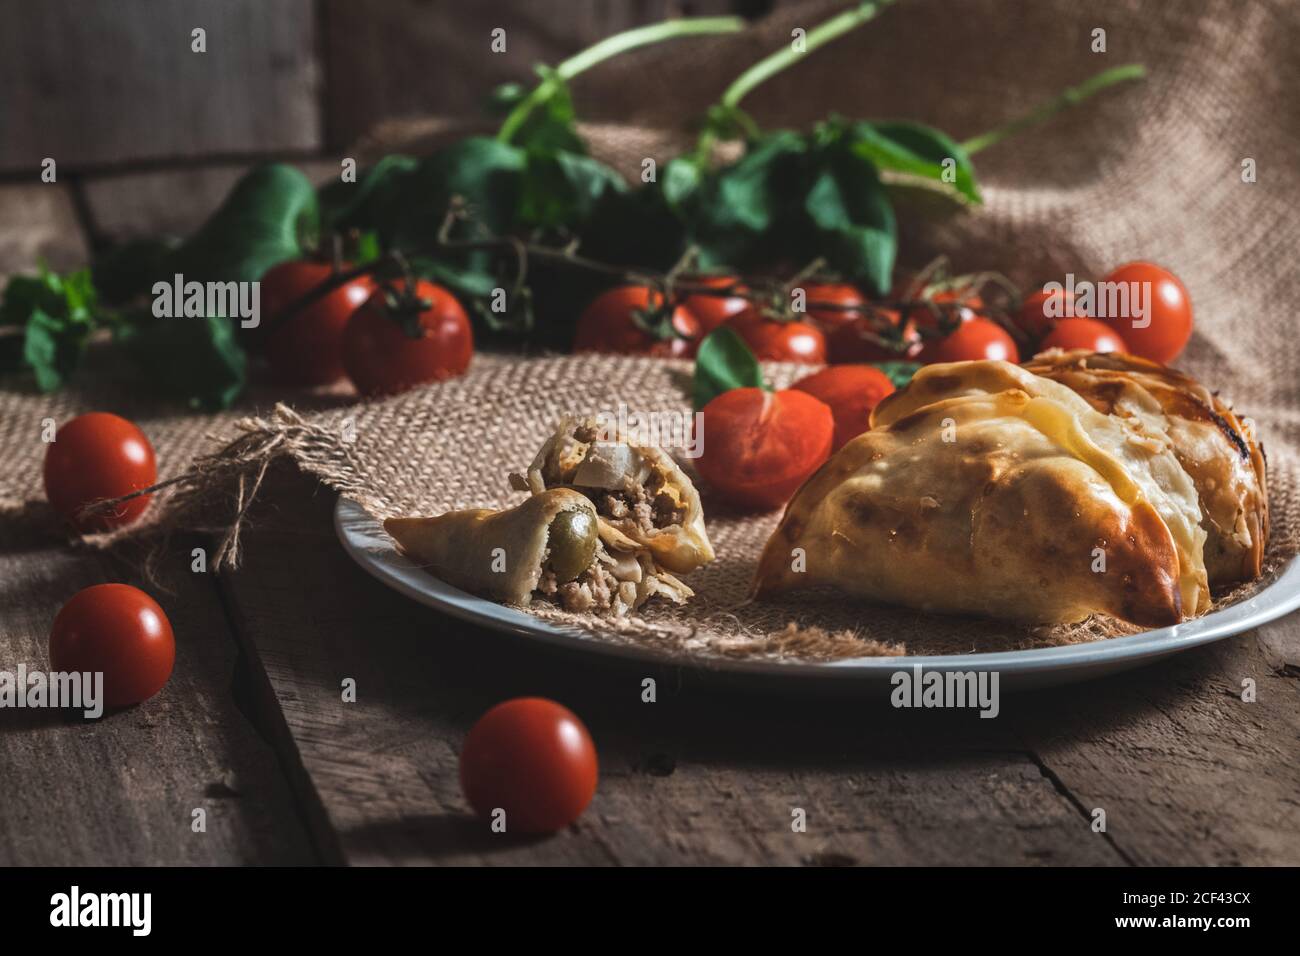 Appetizing freshly baked homemade turnover pies with meat and vegetable filling served on plate with ripe red tomatoes Stock Photo